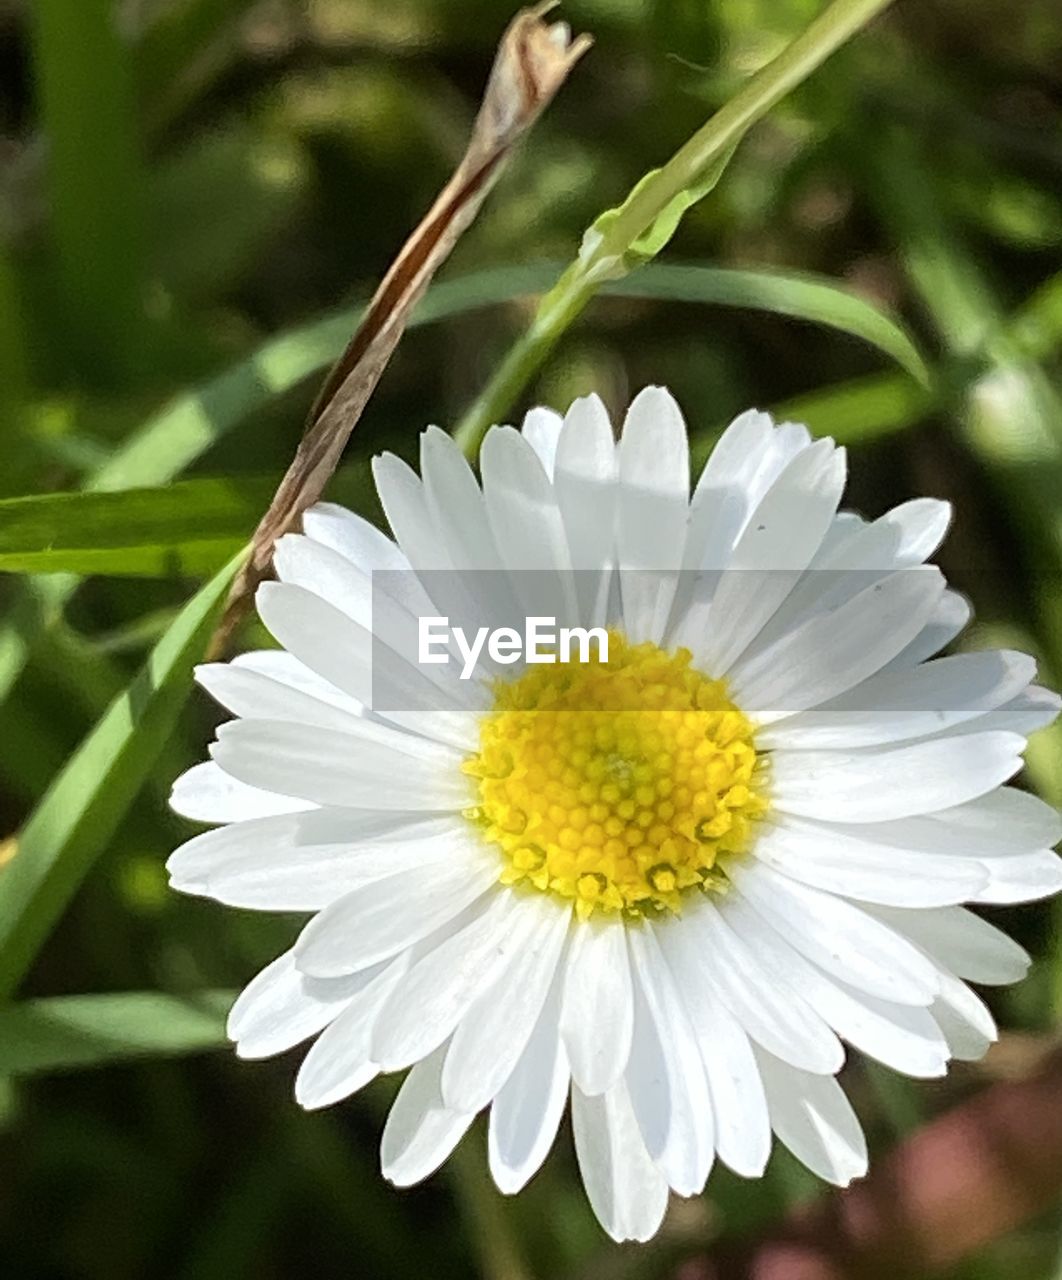 flower, flowering plant, plant, freshness, beauty in nature, flower head, petal, fragility, daisy, close-up, nature, growth, white, inflorescence, pollen, no people, botany, yellow, macro photography, focus on foreground, outdoors, summer, blossom, springtime, plant stem, environment, wildflower